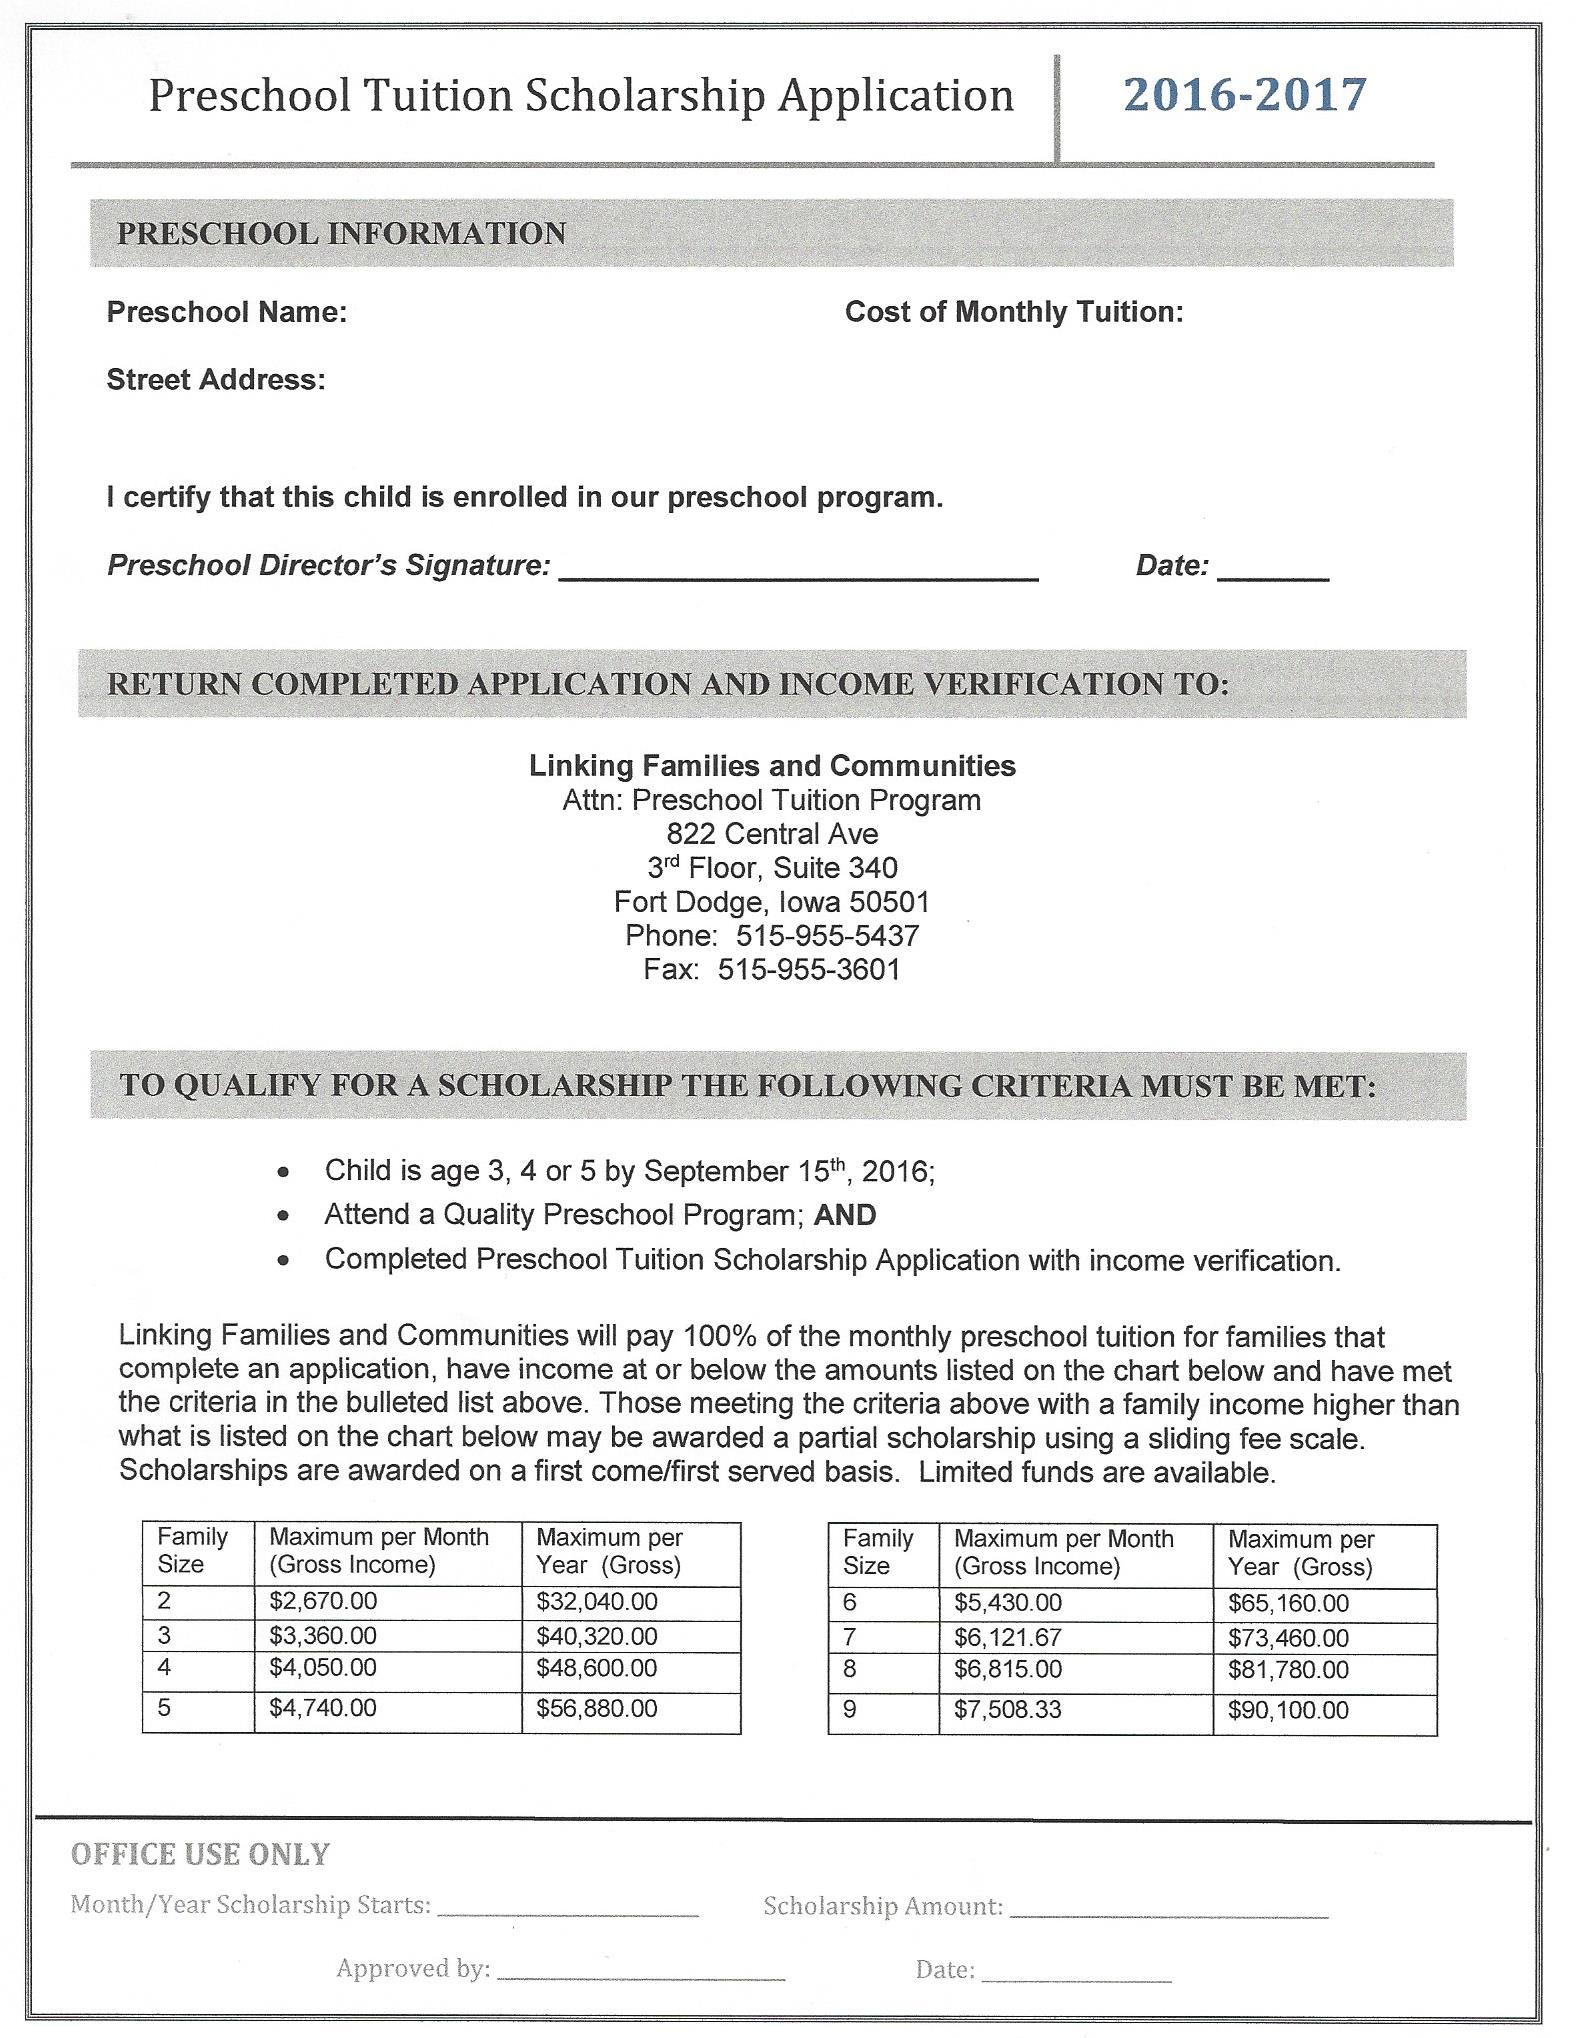 Preschool Tuition Scholarship Application 2nd Page